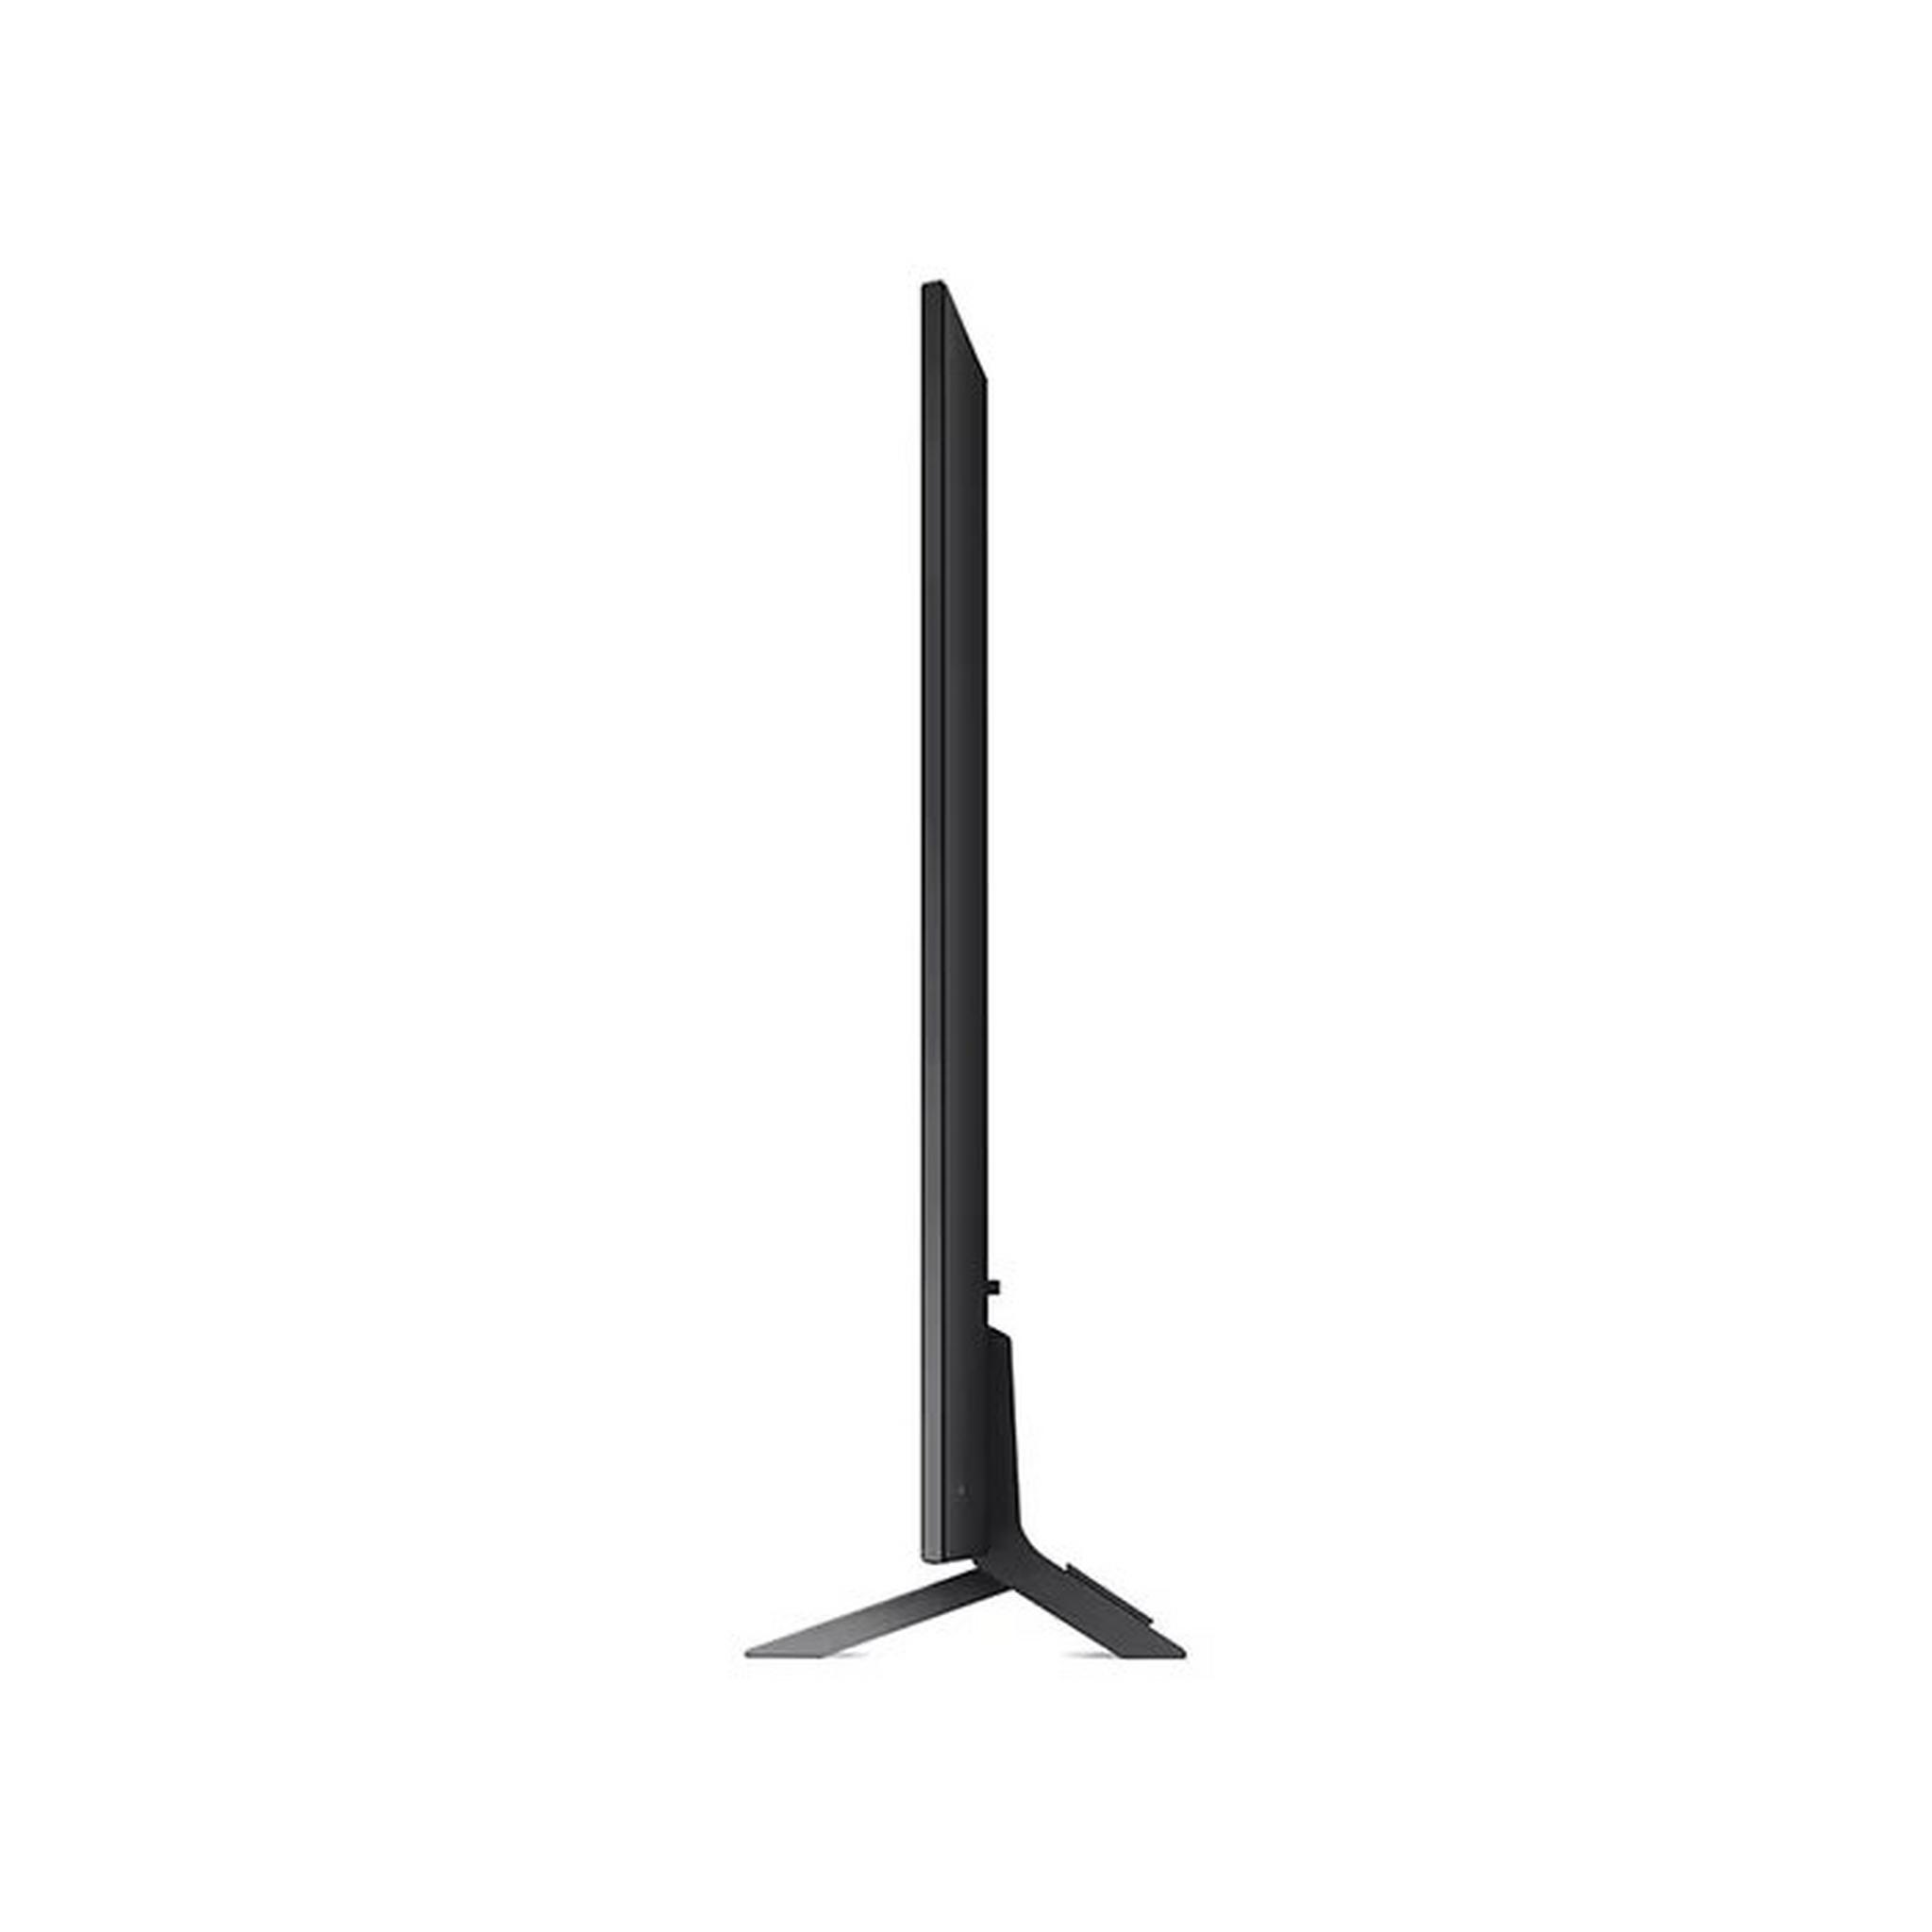 LG 65 -inch QNED7S Series Real 4K UHD Smart LED TV 65QNED7S6 - Black